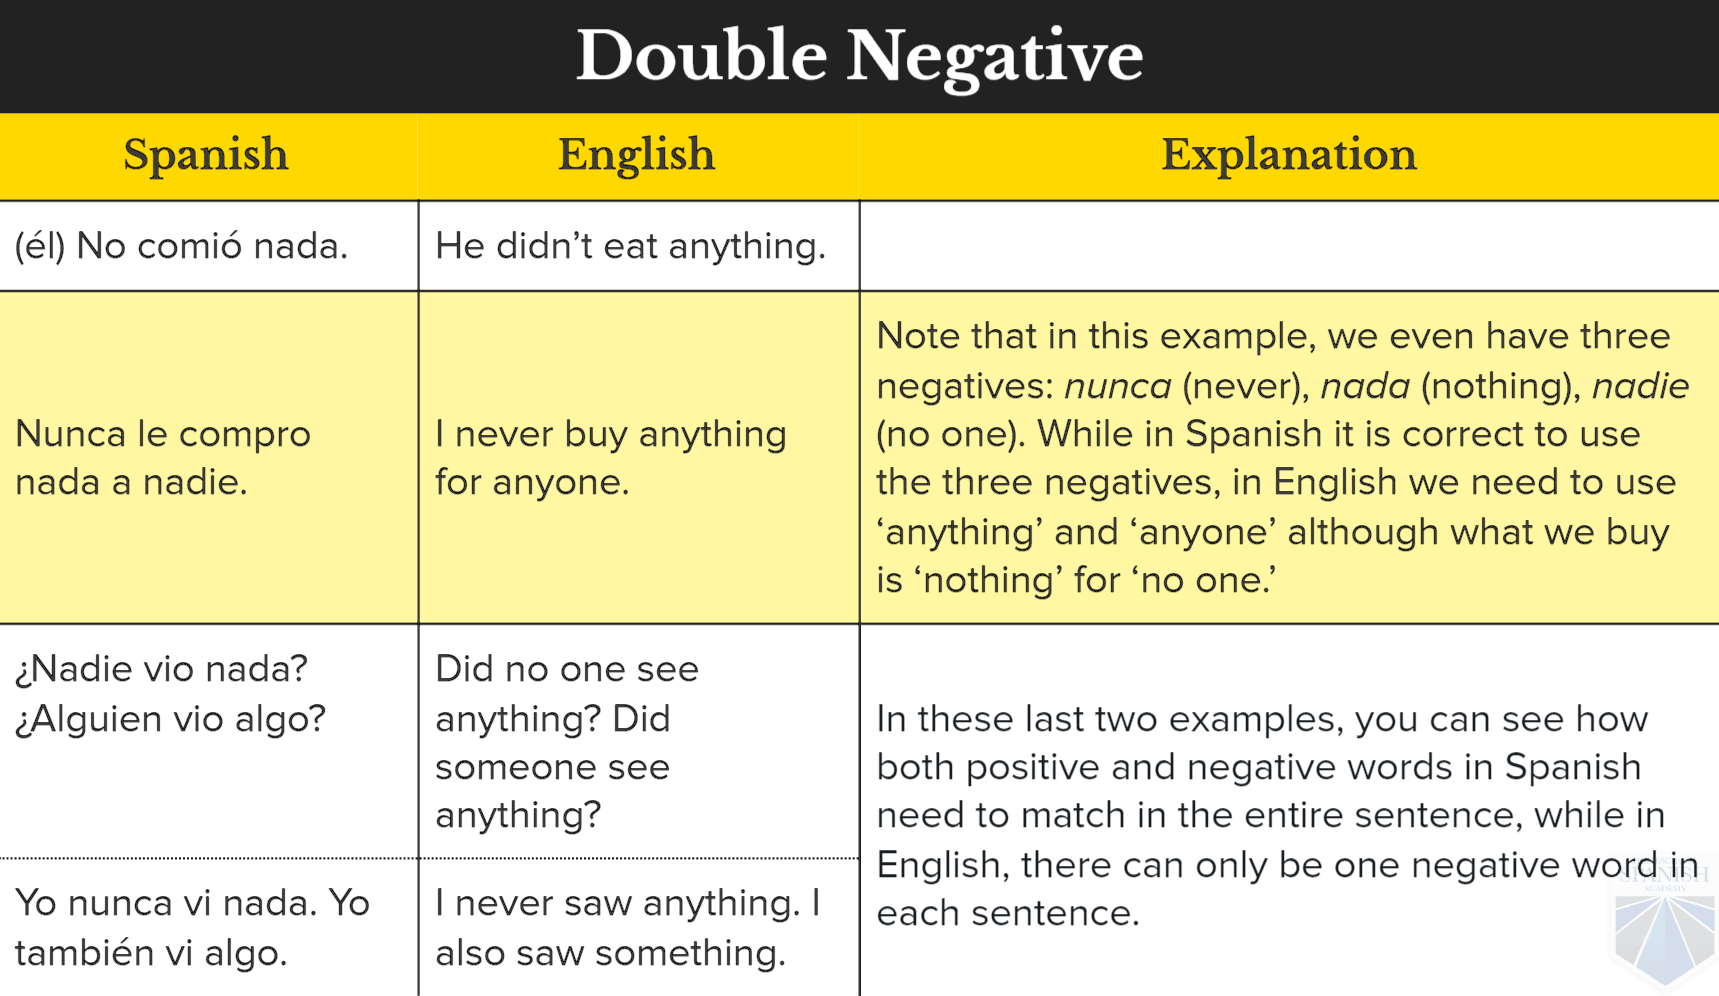 Negation in English. Double Negation. Double Negation in English. Double Negation in English examples. Need something перевод